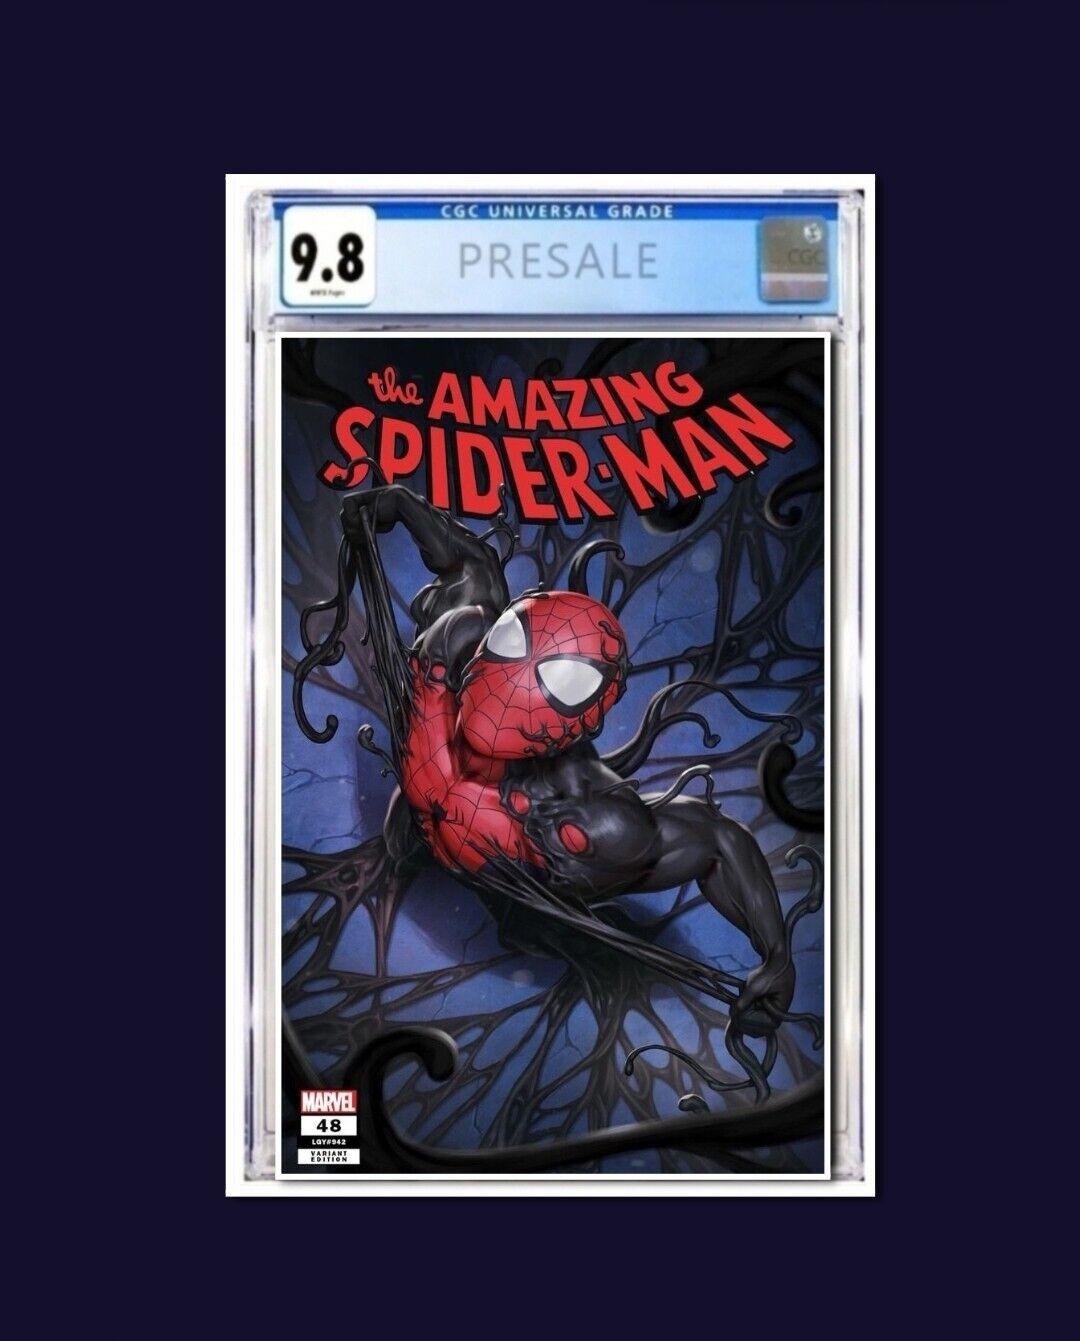 Amazing Spider-Man #48 CGC 9.8 PREORDER Woo Chul Lee C2E2 Variant Limited 400